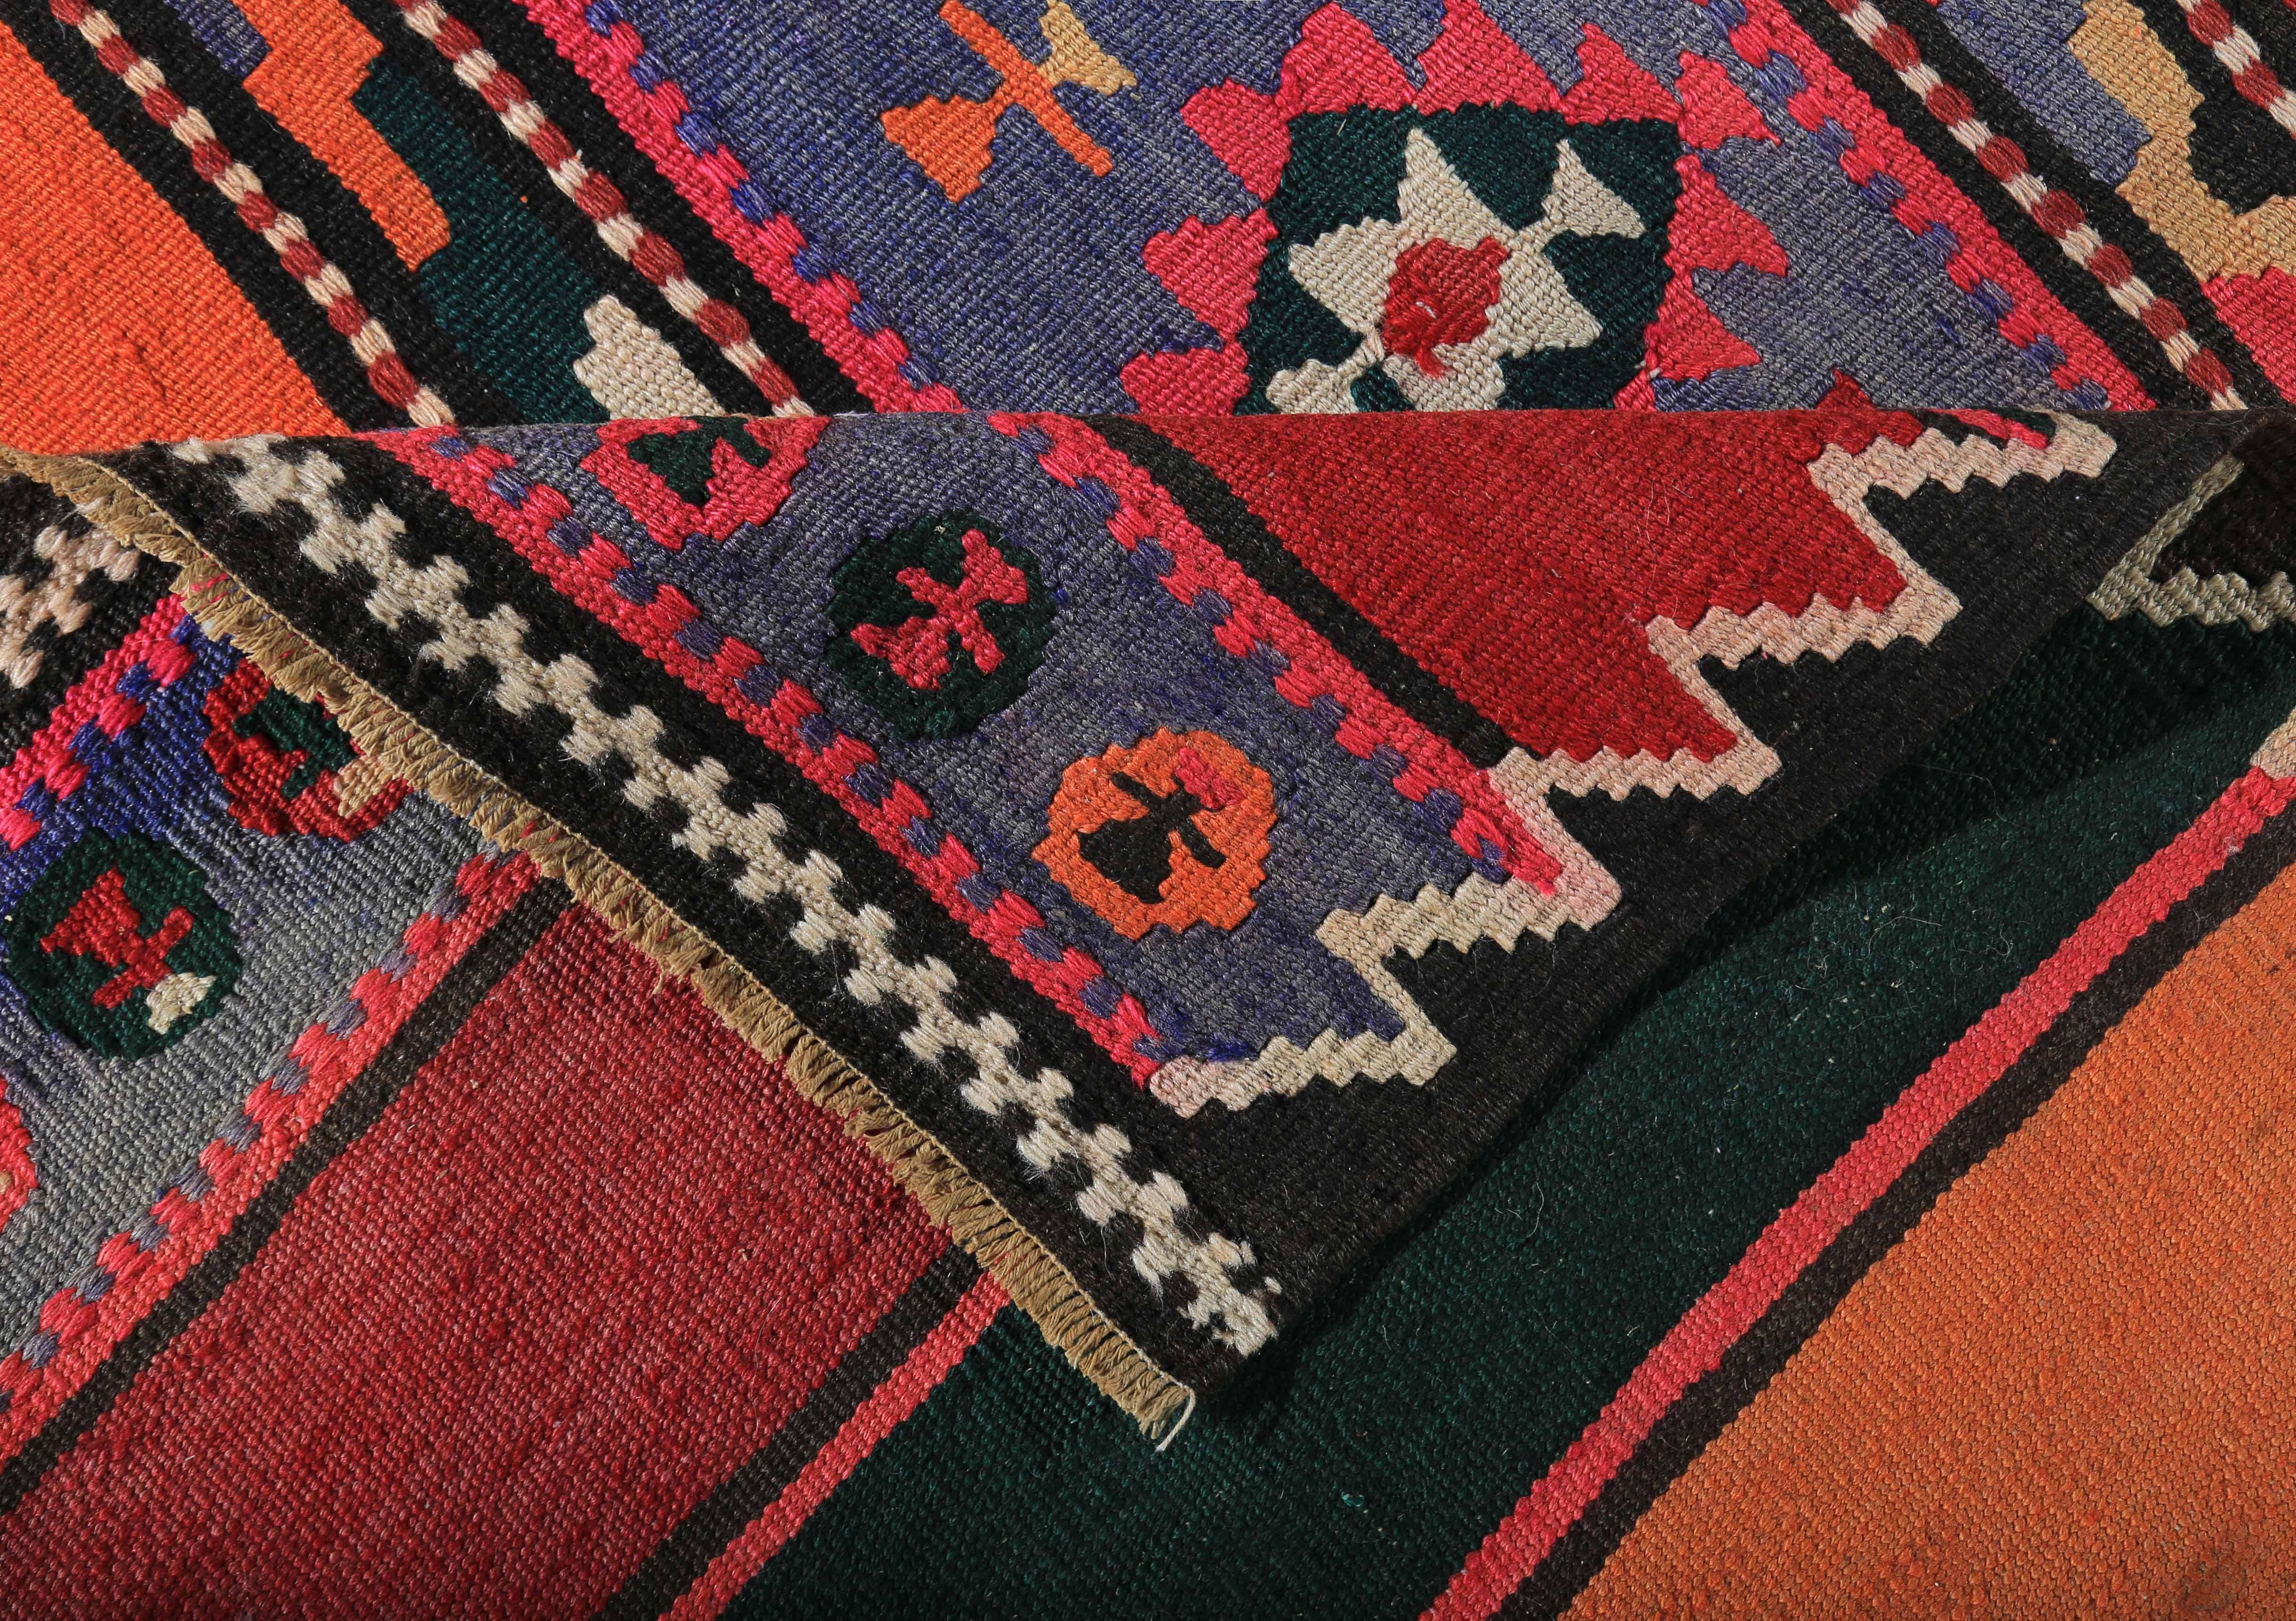 Hand-Woven Turkish Kilim Rug with Green and Red Stripes Decorated with Tribal Medallions For Sale